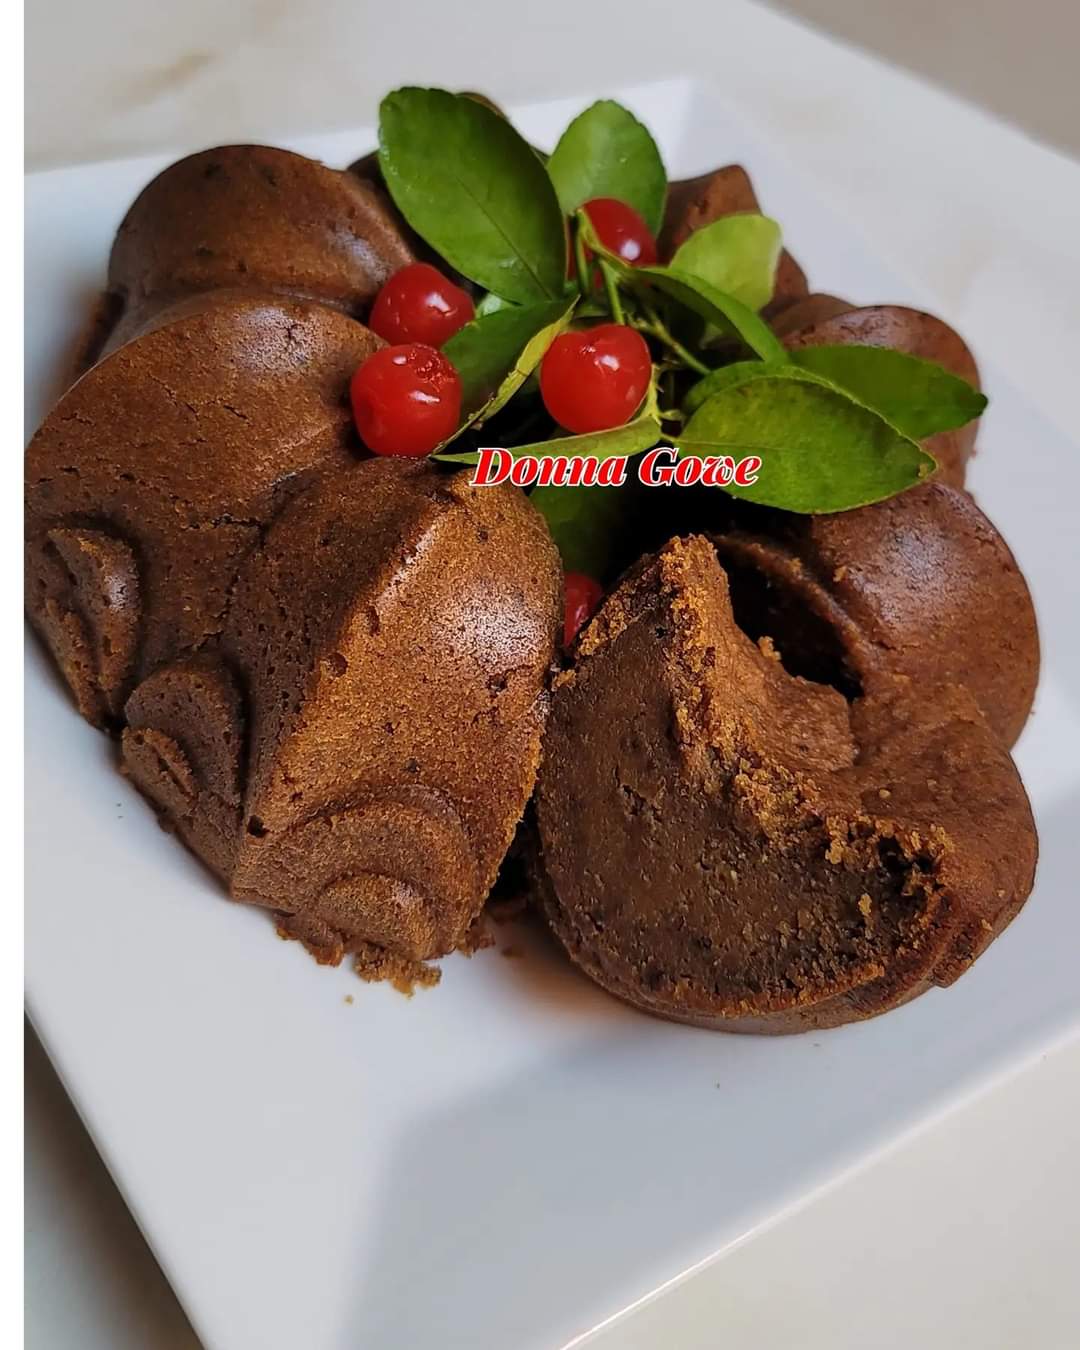 Nyam Bad Plantain Fruit Cake 1lb - Donna Gowe (DHL SHIPPING REQUIRED)